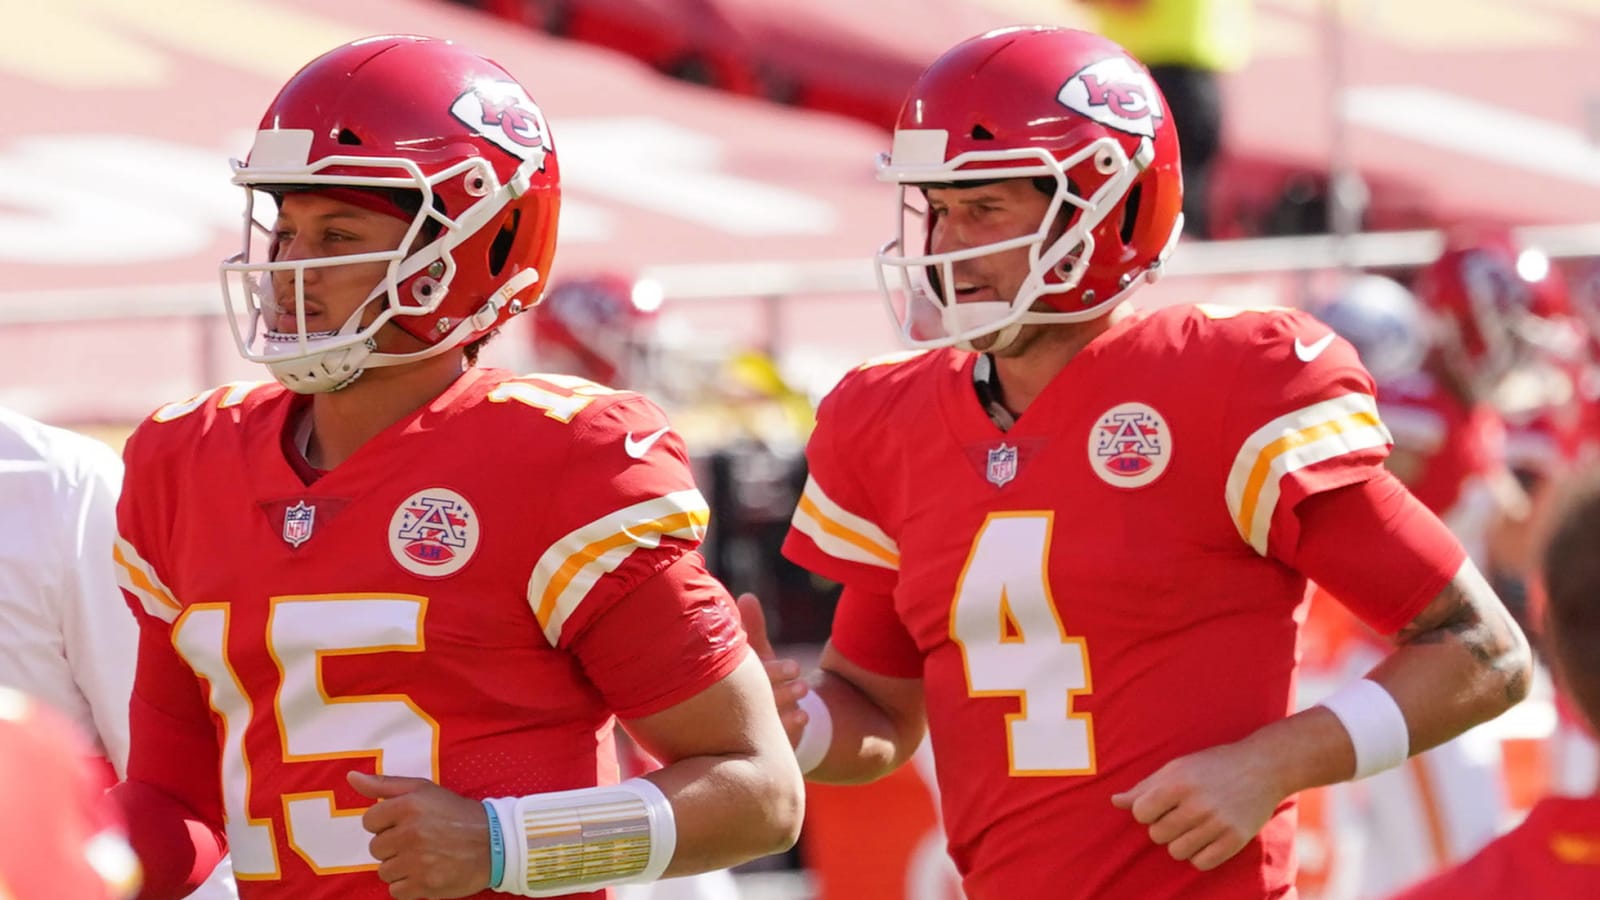 Patrick Mahomes and Chad Henne running off field